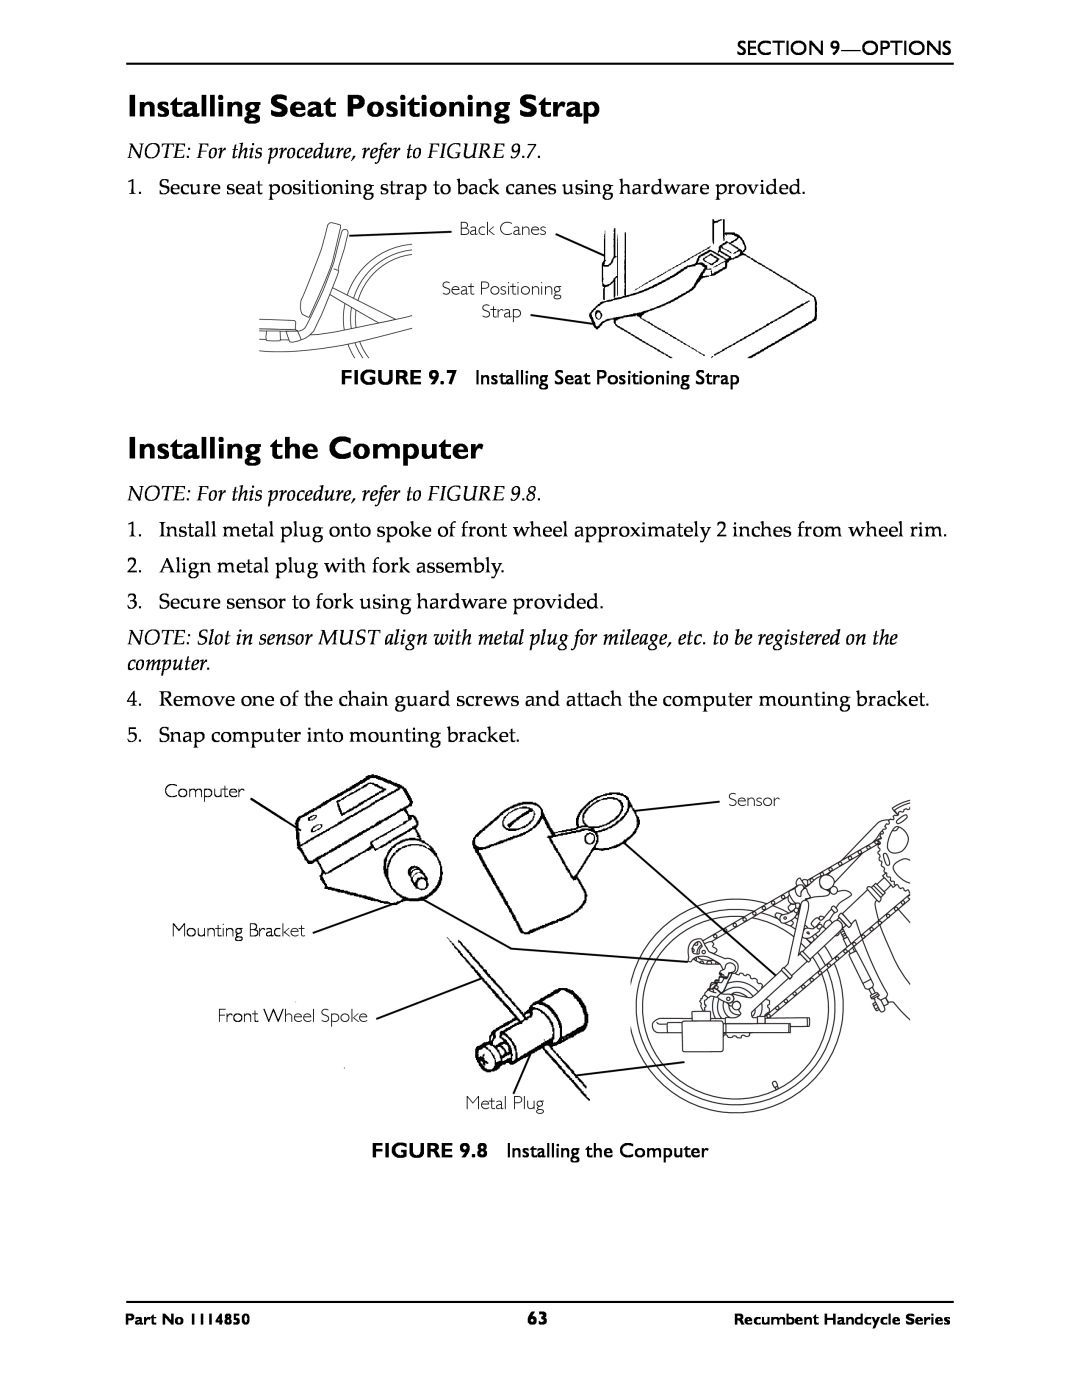 Invacare XLTPRO Installing Seat Positioning Strap, Installing the Computer, NOTE For this procedure, refer to FIGURE 